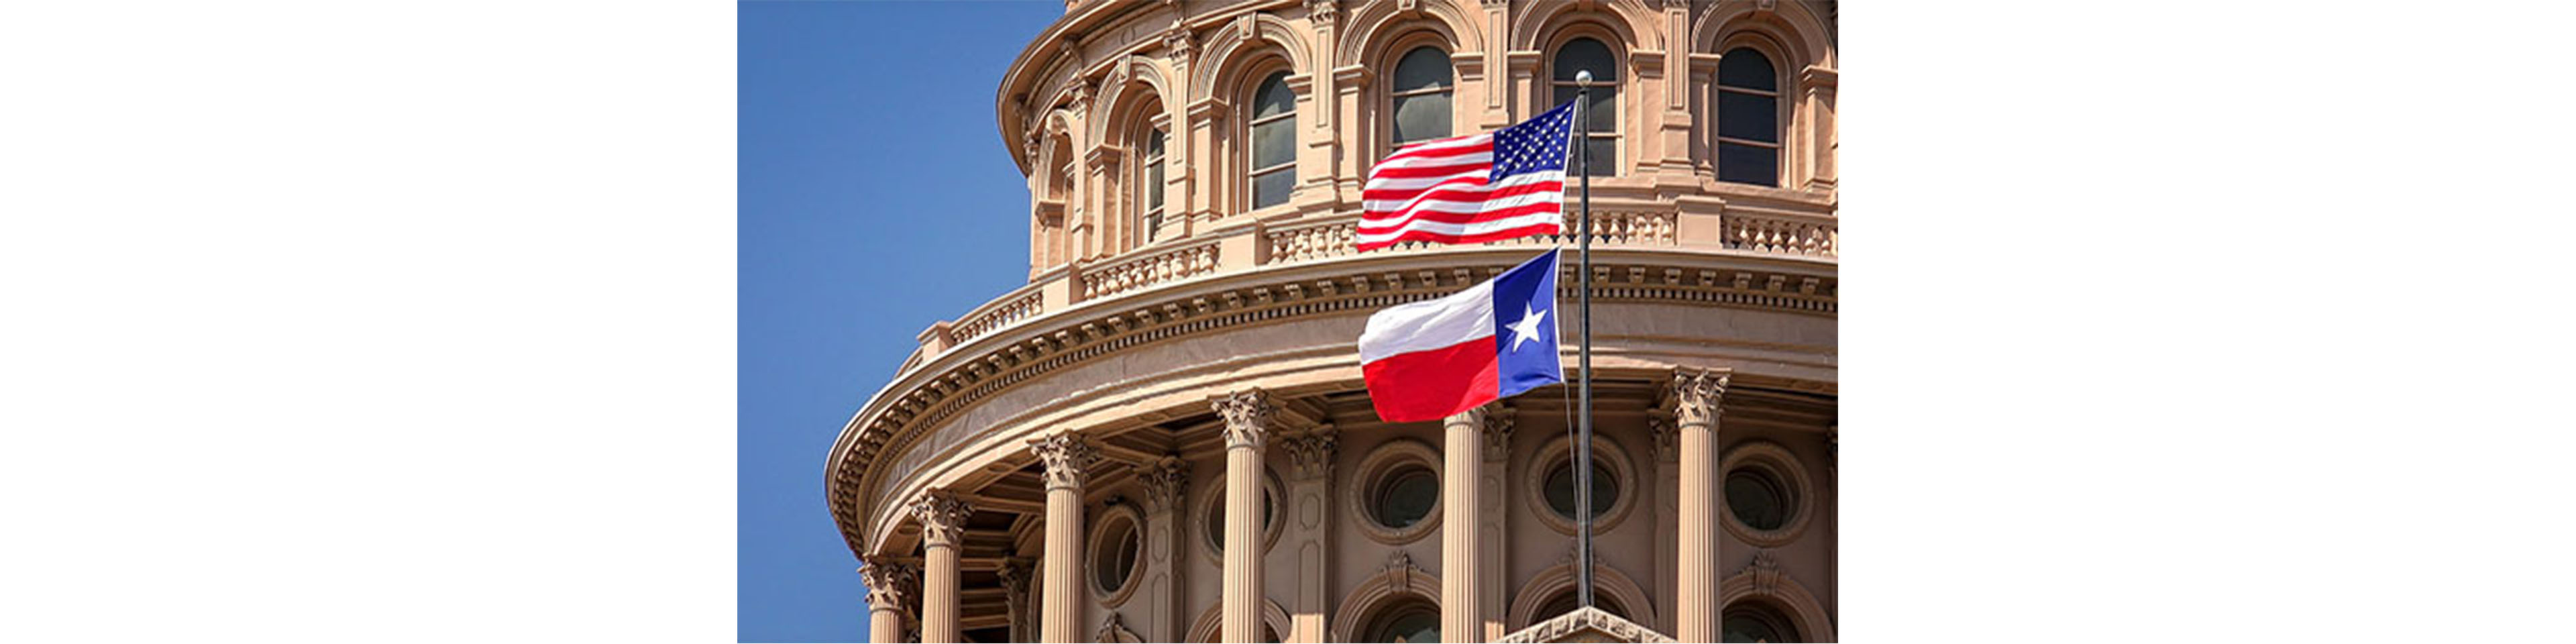 Texas Changes its Name Availability Standard